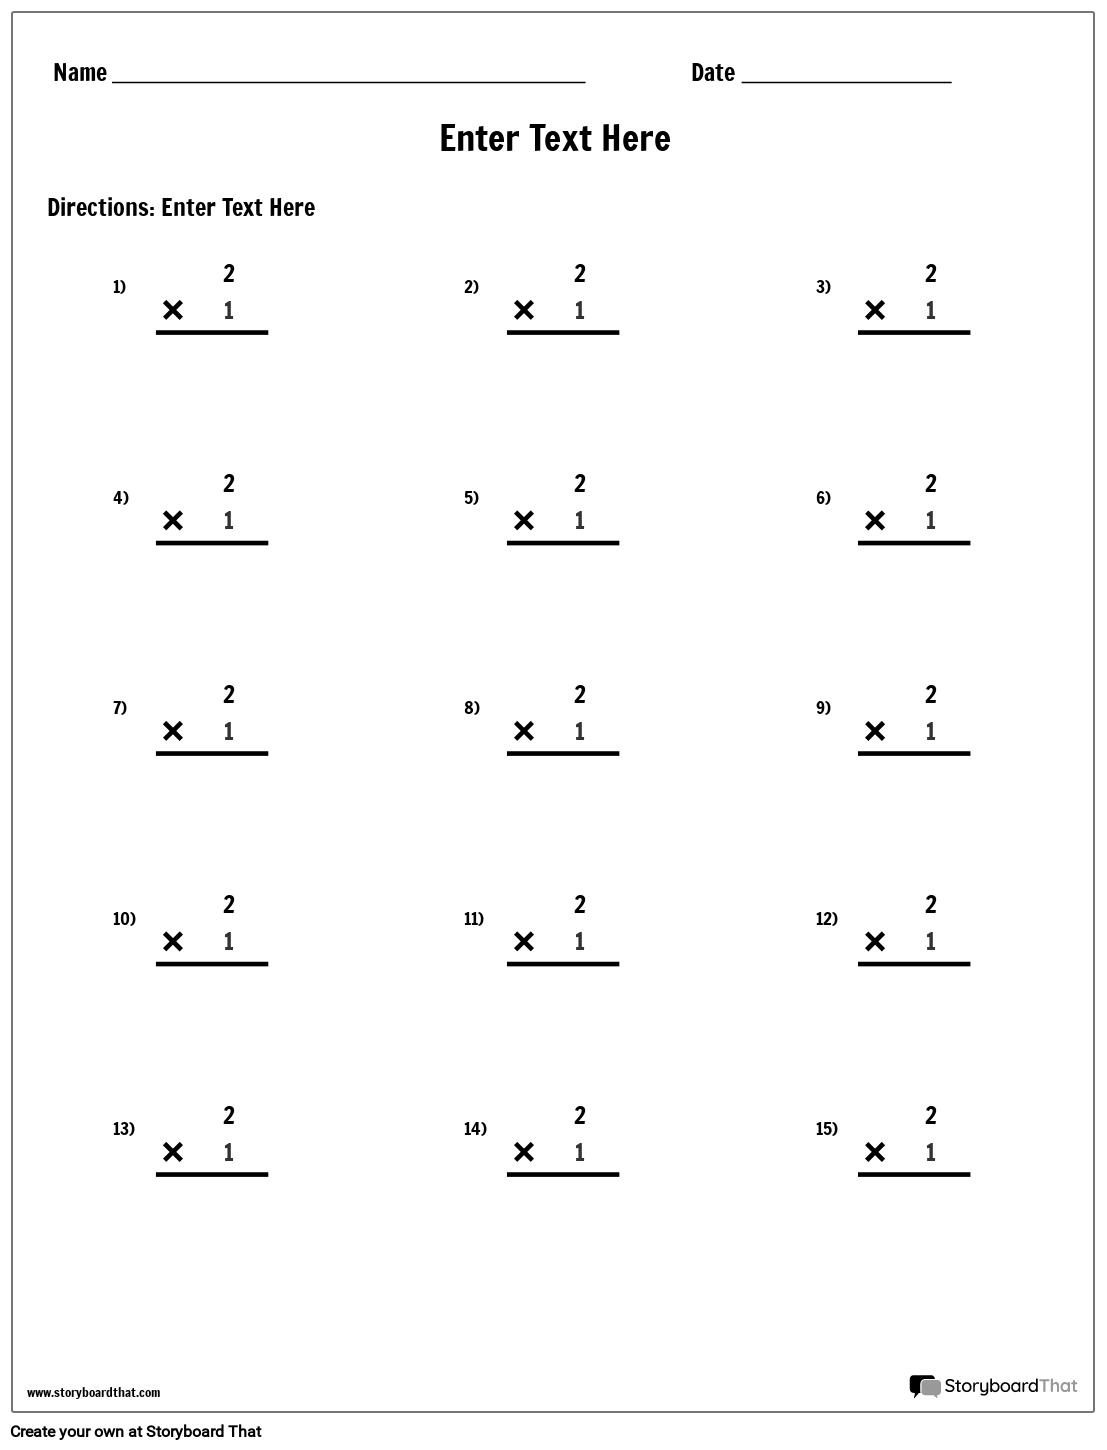 Multiplication Practice Worksheet with 15 Simple Problems